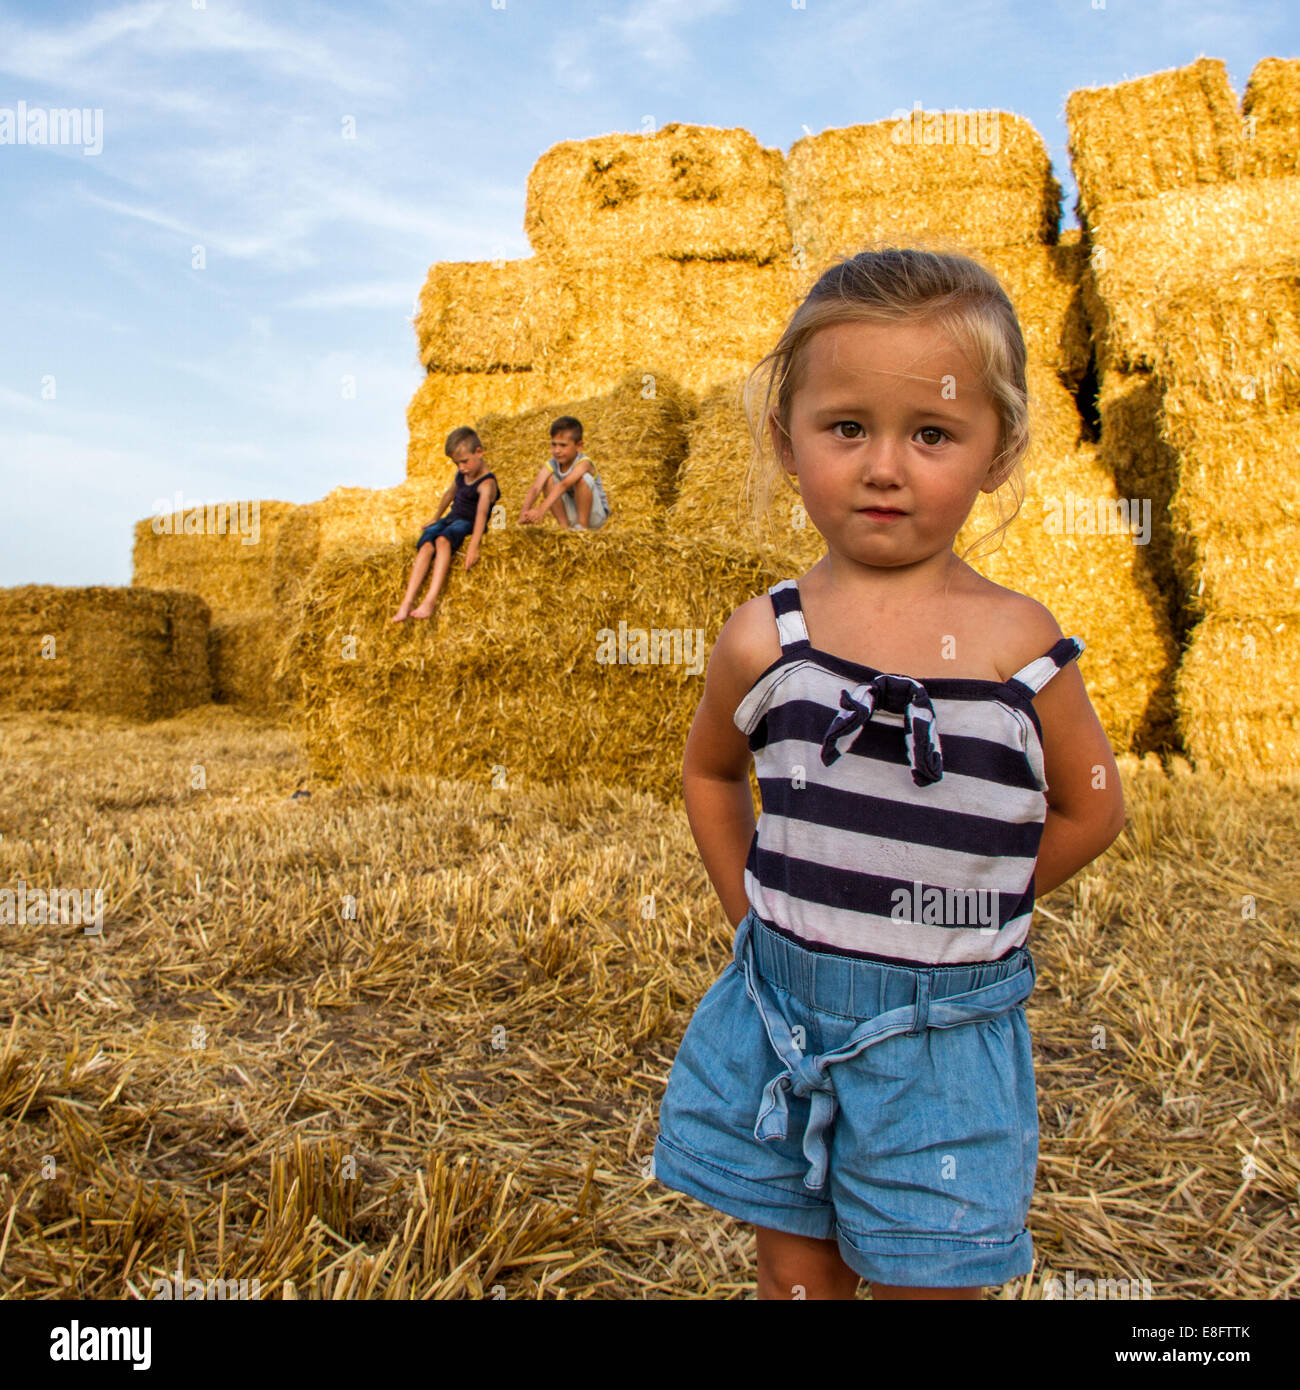 Three children playing in a field of hay bales, England, UK Stock Photo